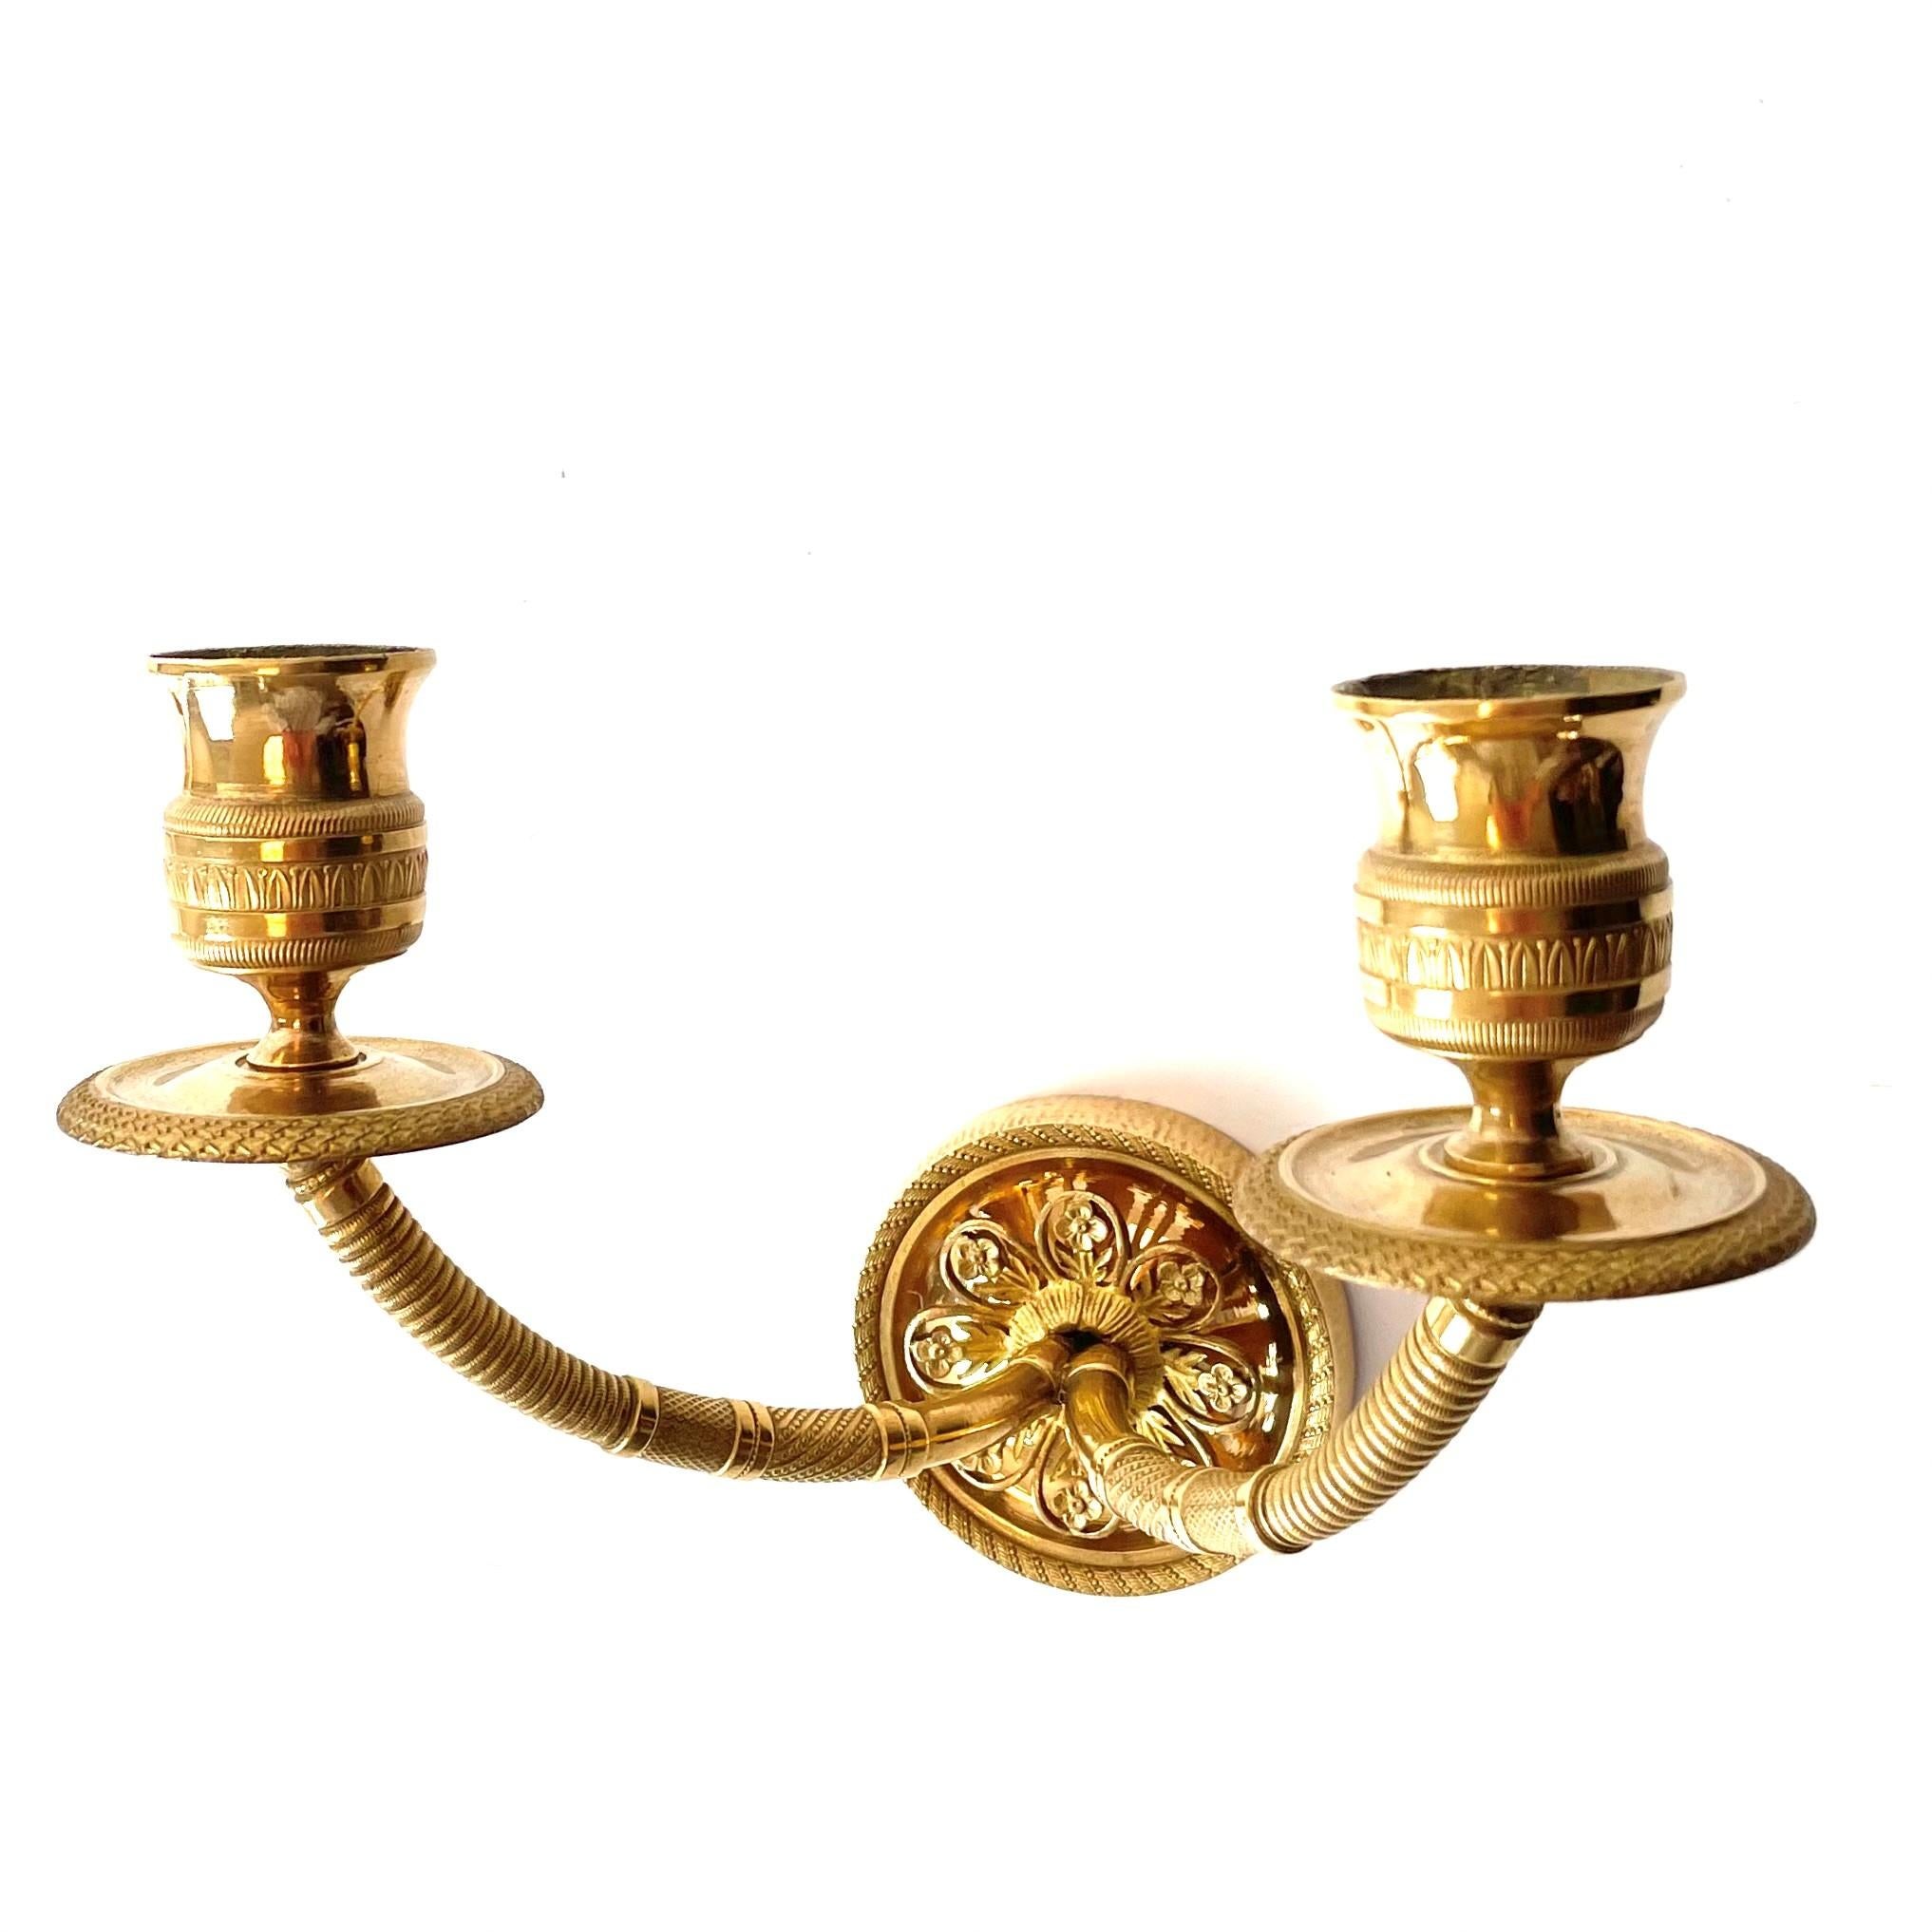 Elegant Pair of Empire Appliques in Gilt Bronze from Early 19th Century For Sale 2